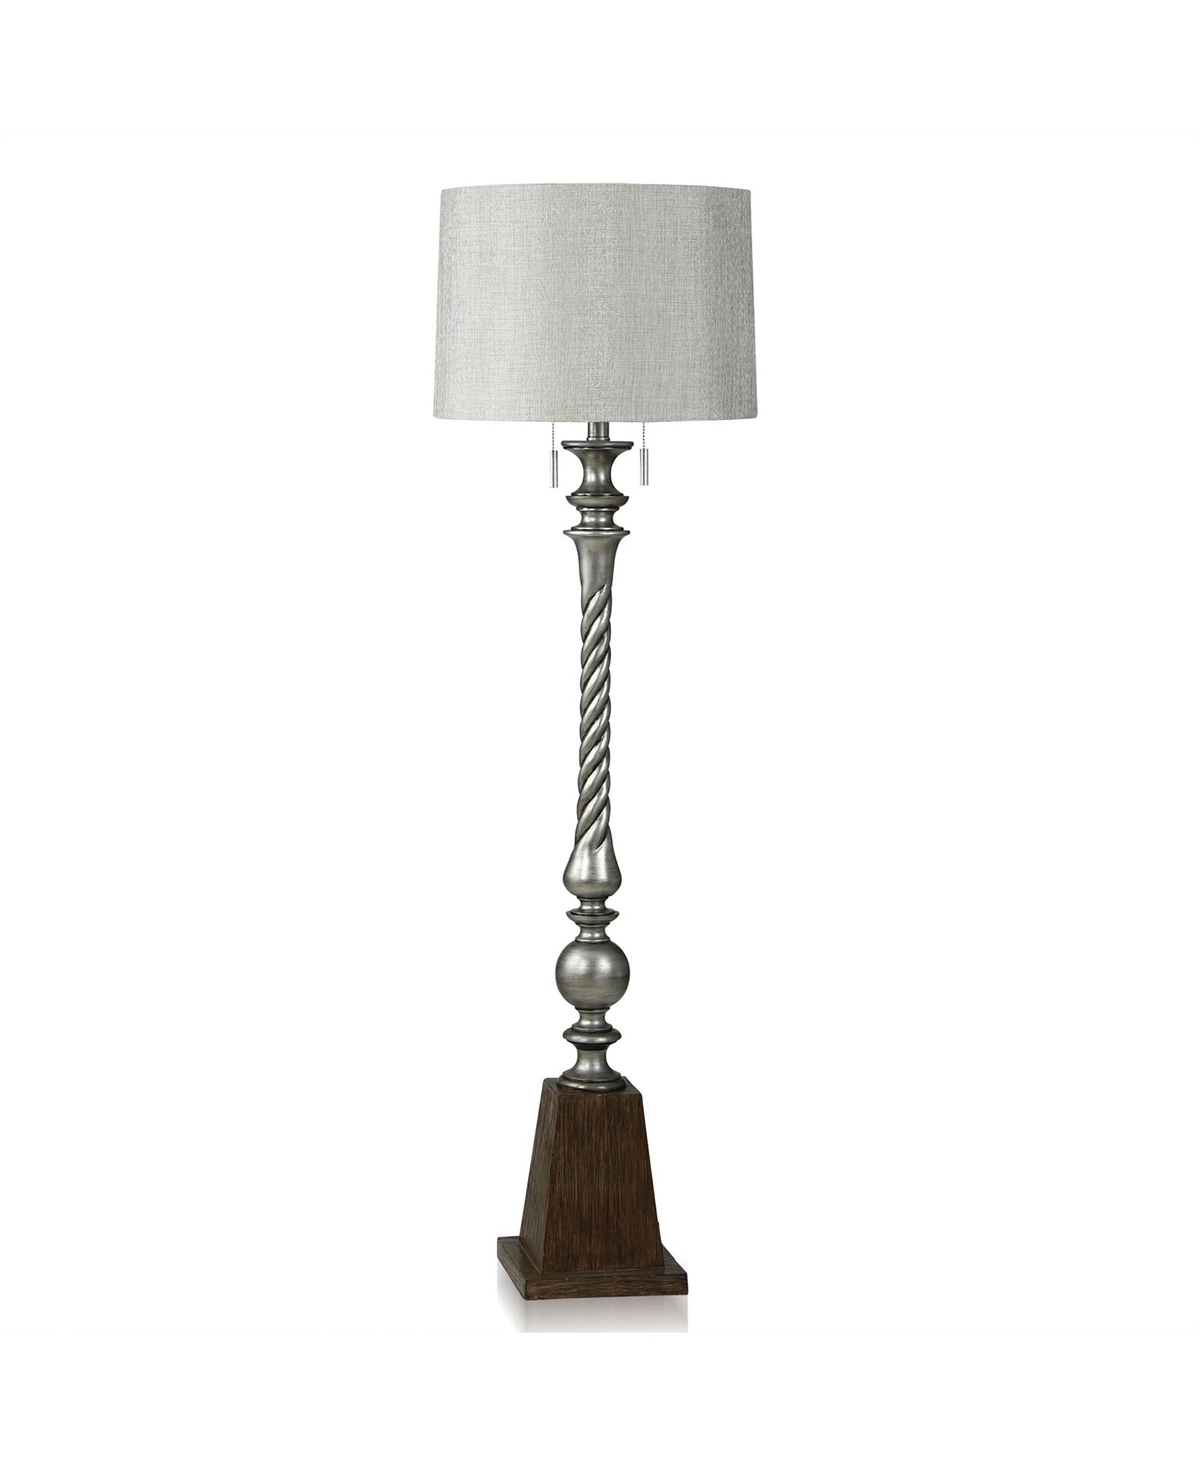 Stylecraft Home Collection 65" India Painted Swirl Pedestal Floor Lamp In Metallic Silver,faux Brown Wood